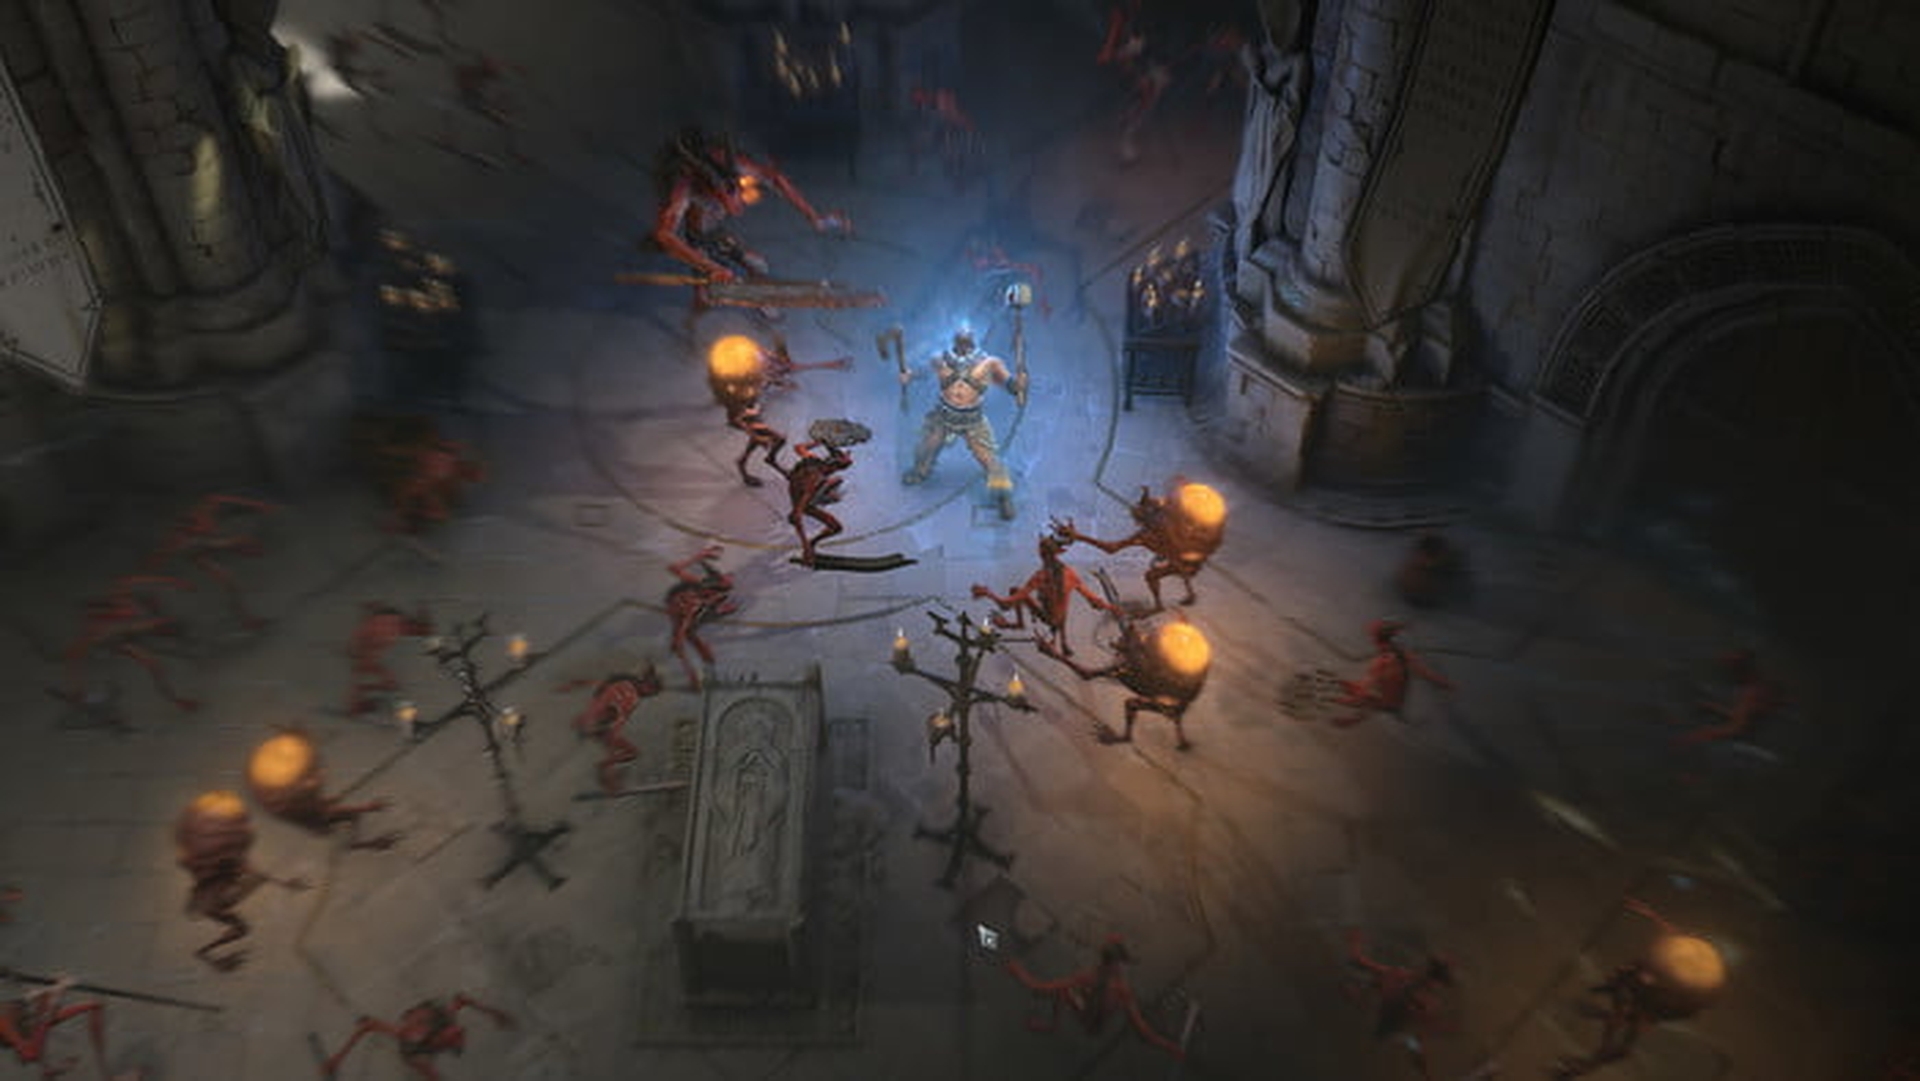 In this article, we will be covering the Diablo 4 release date, system requirements, and classes, so know what to expect from this upcoming title.